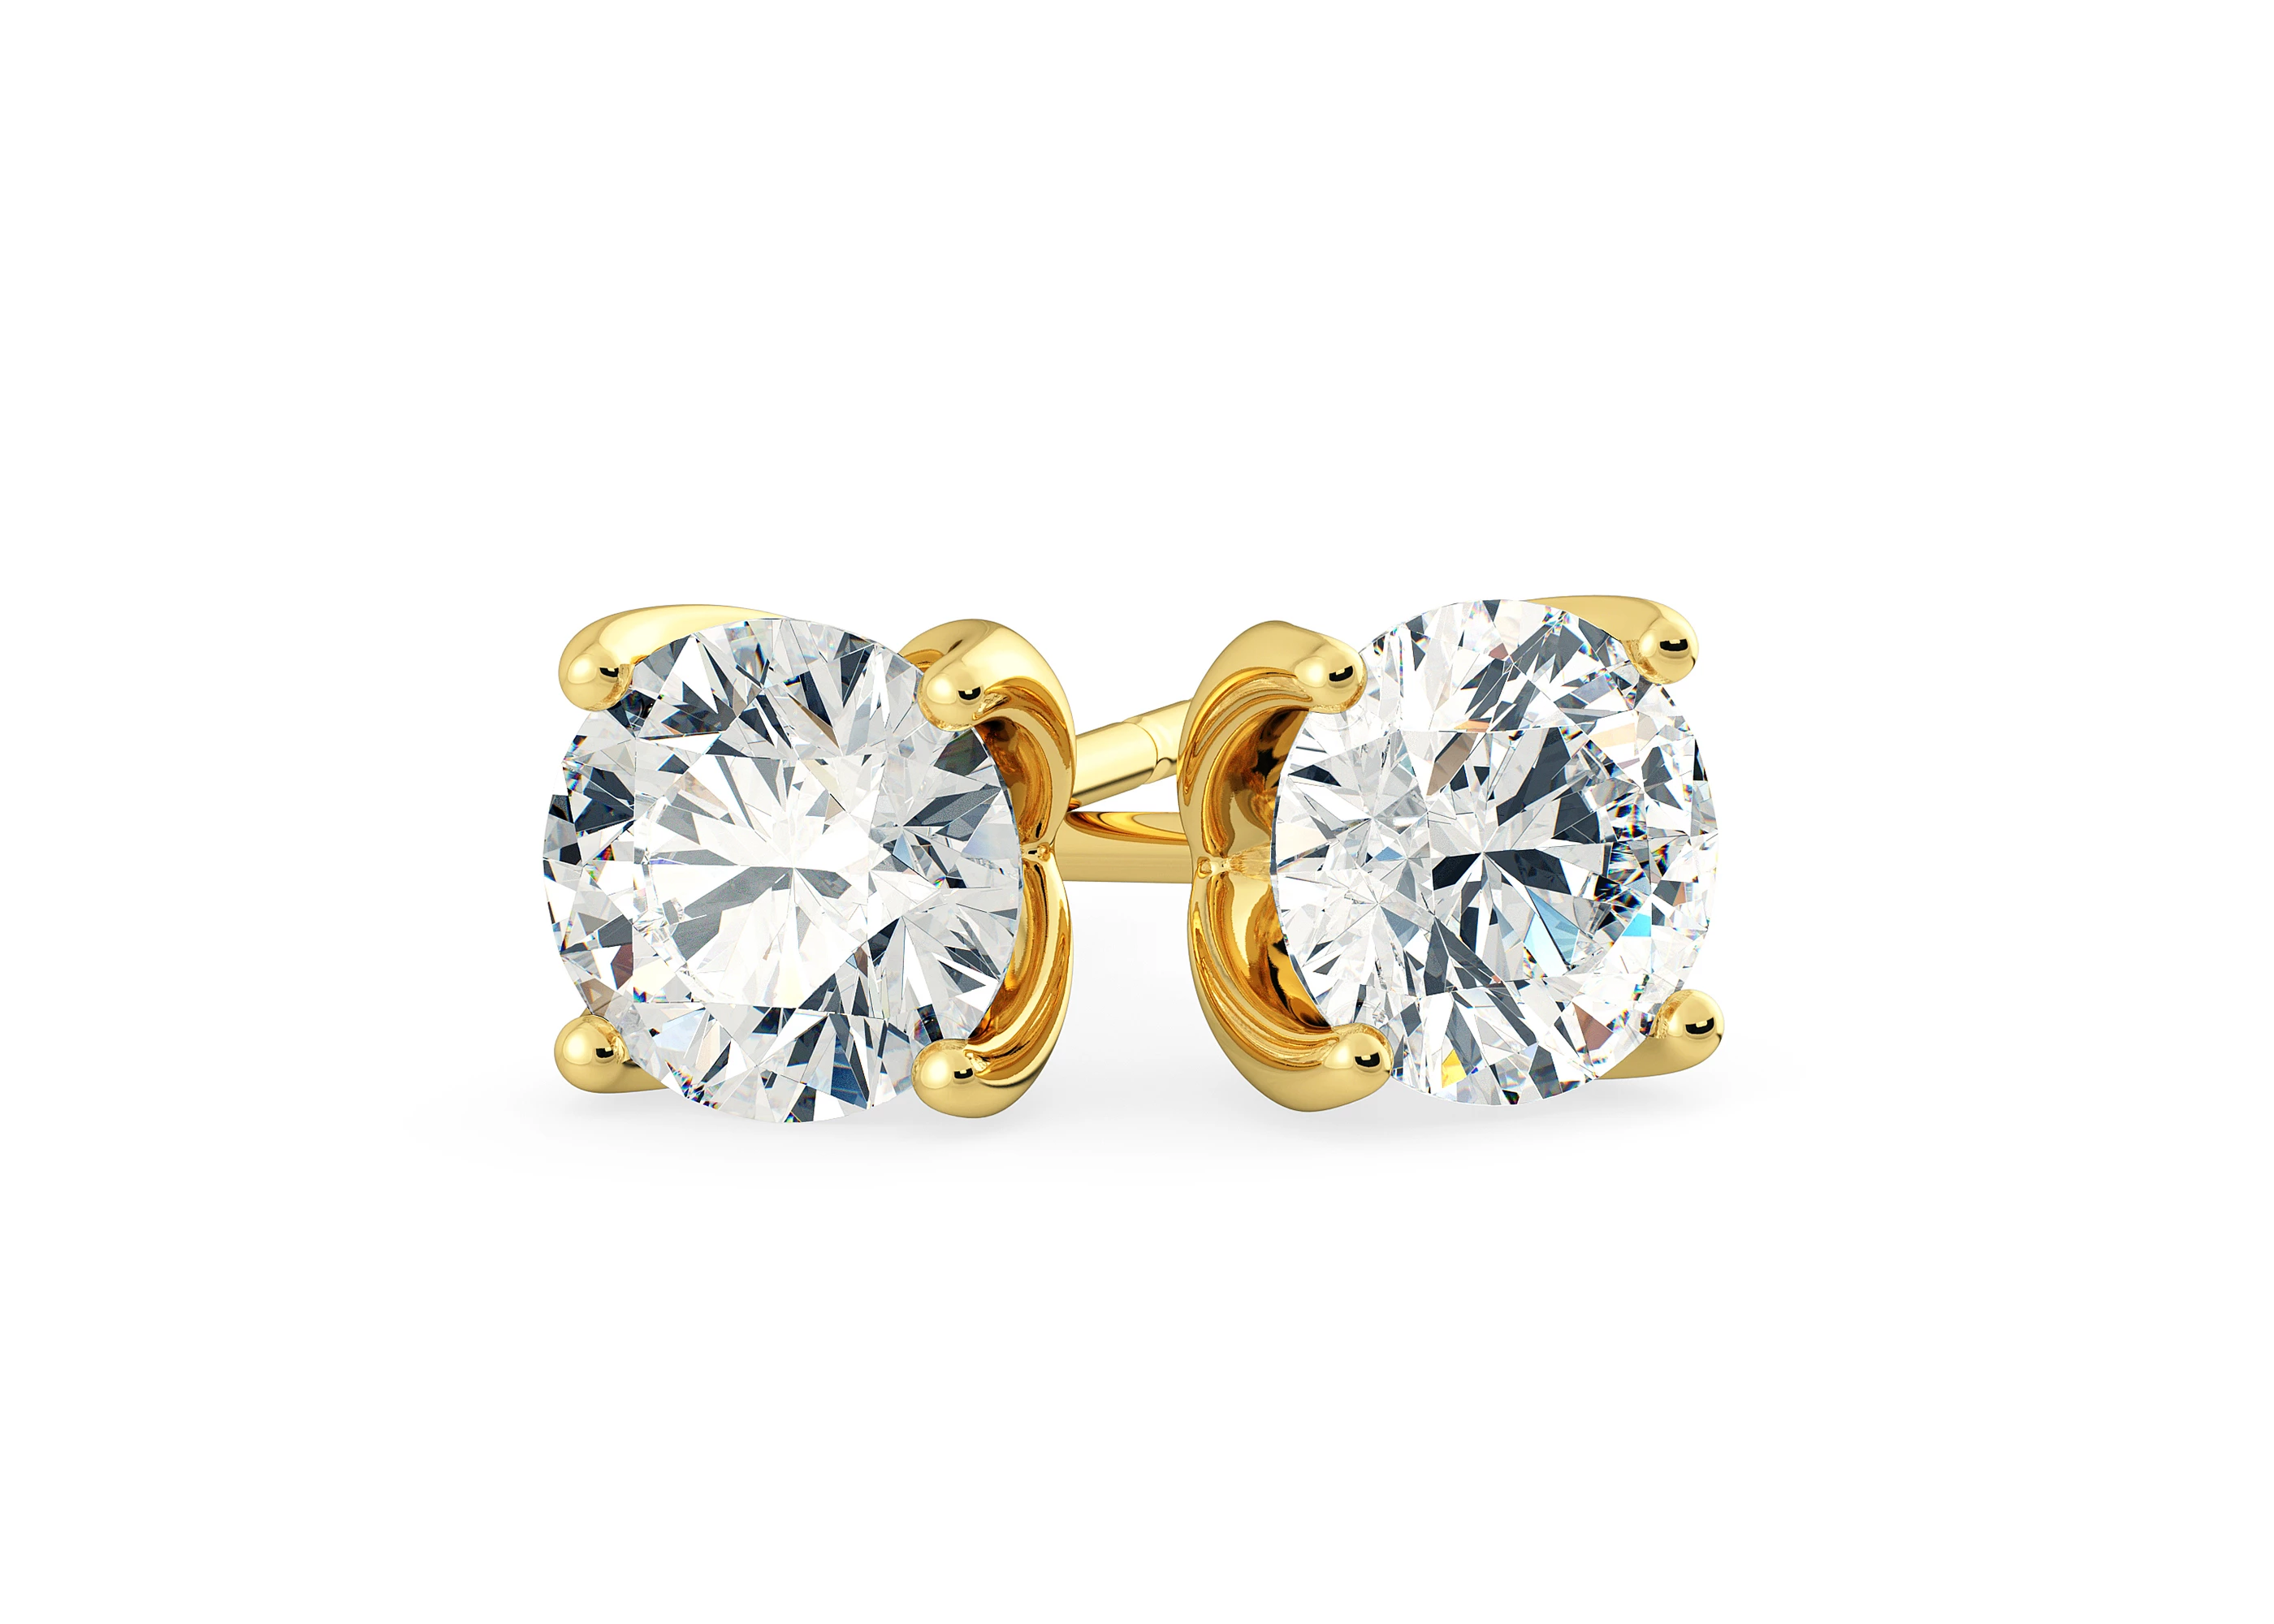 Mirabelle Round Brilliant Diamond Stud Earrings in 18K Yellow Gold with Screw Backs